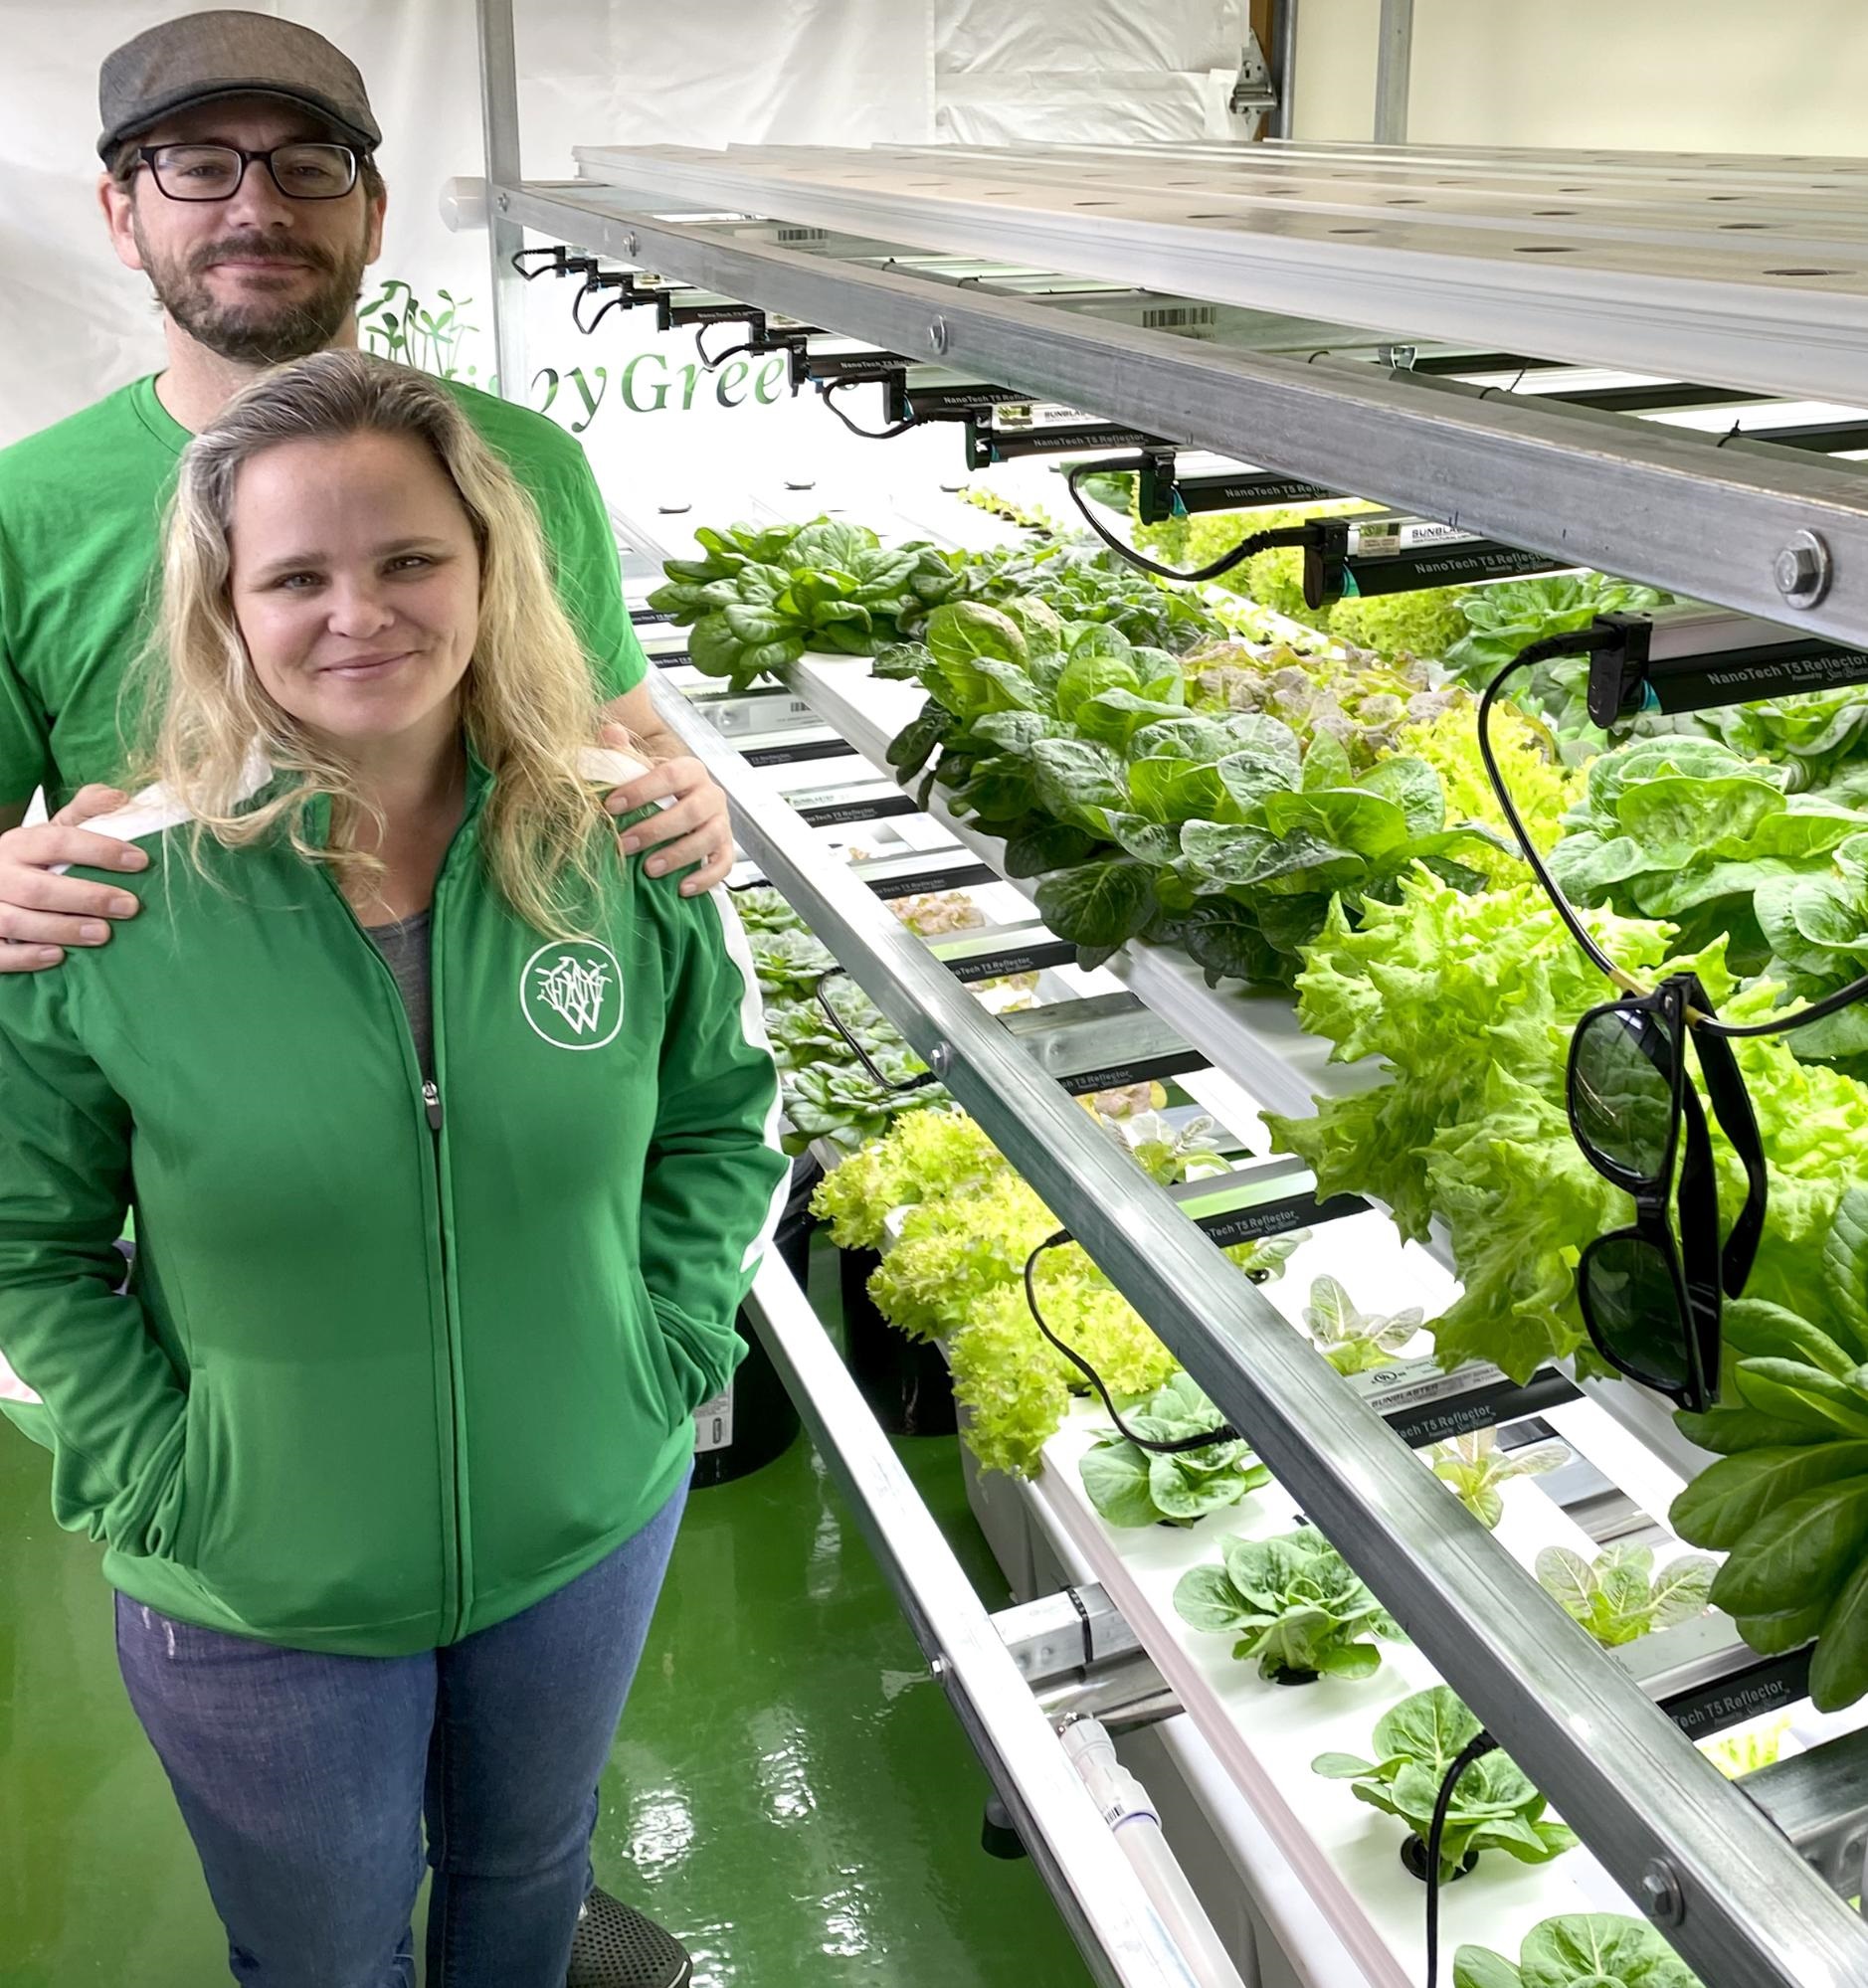 Alicia Beeson (front), Business Manager, Oaken Beeson (back), Owner and Master Grower, stand in front of their hydroponic greens-growing operation.